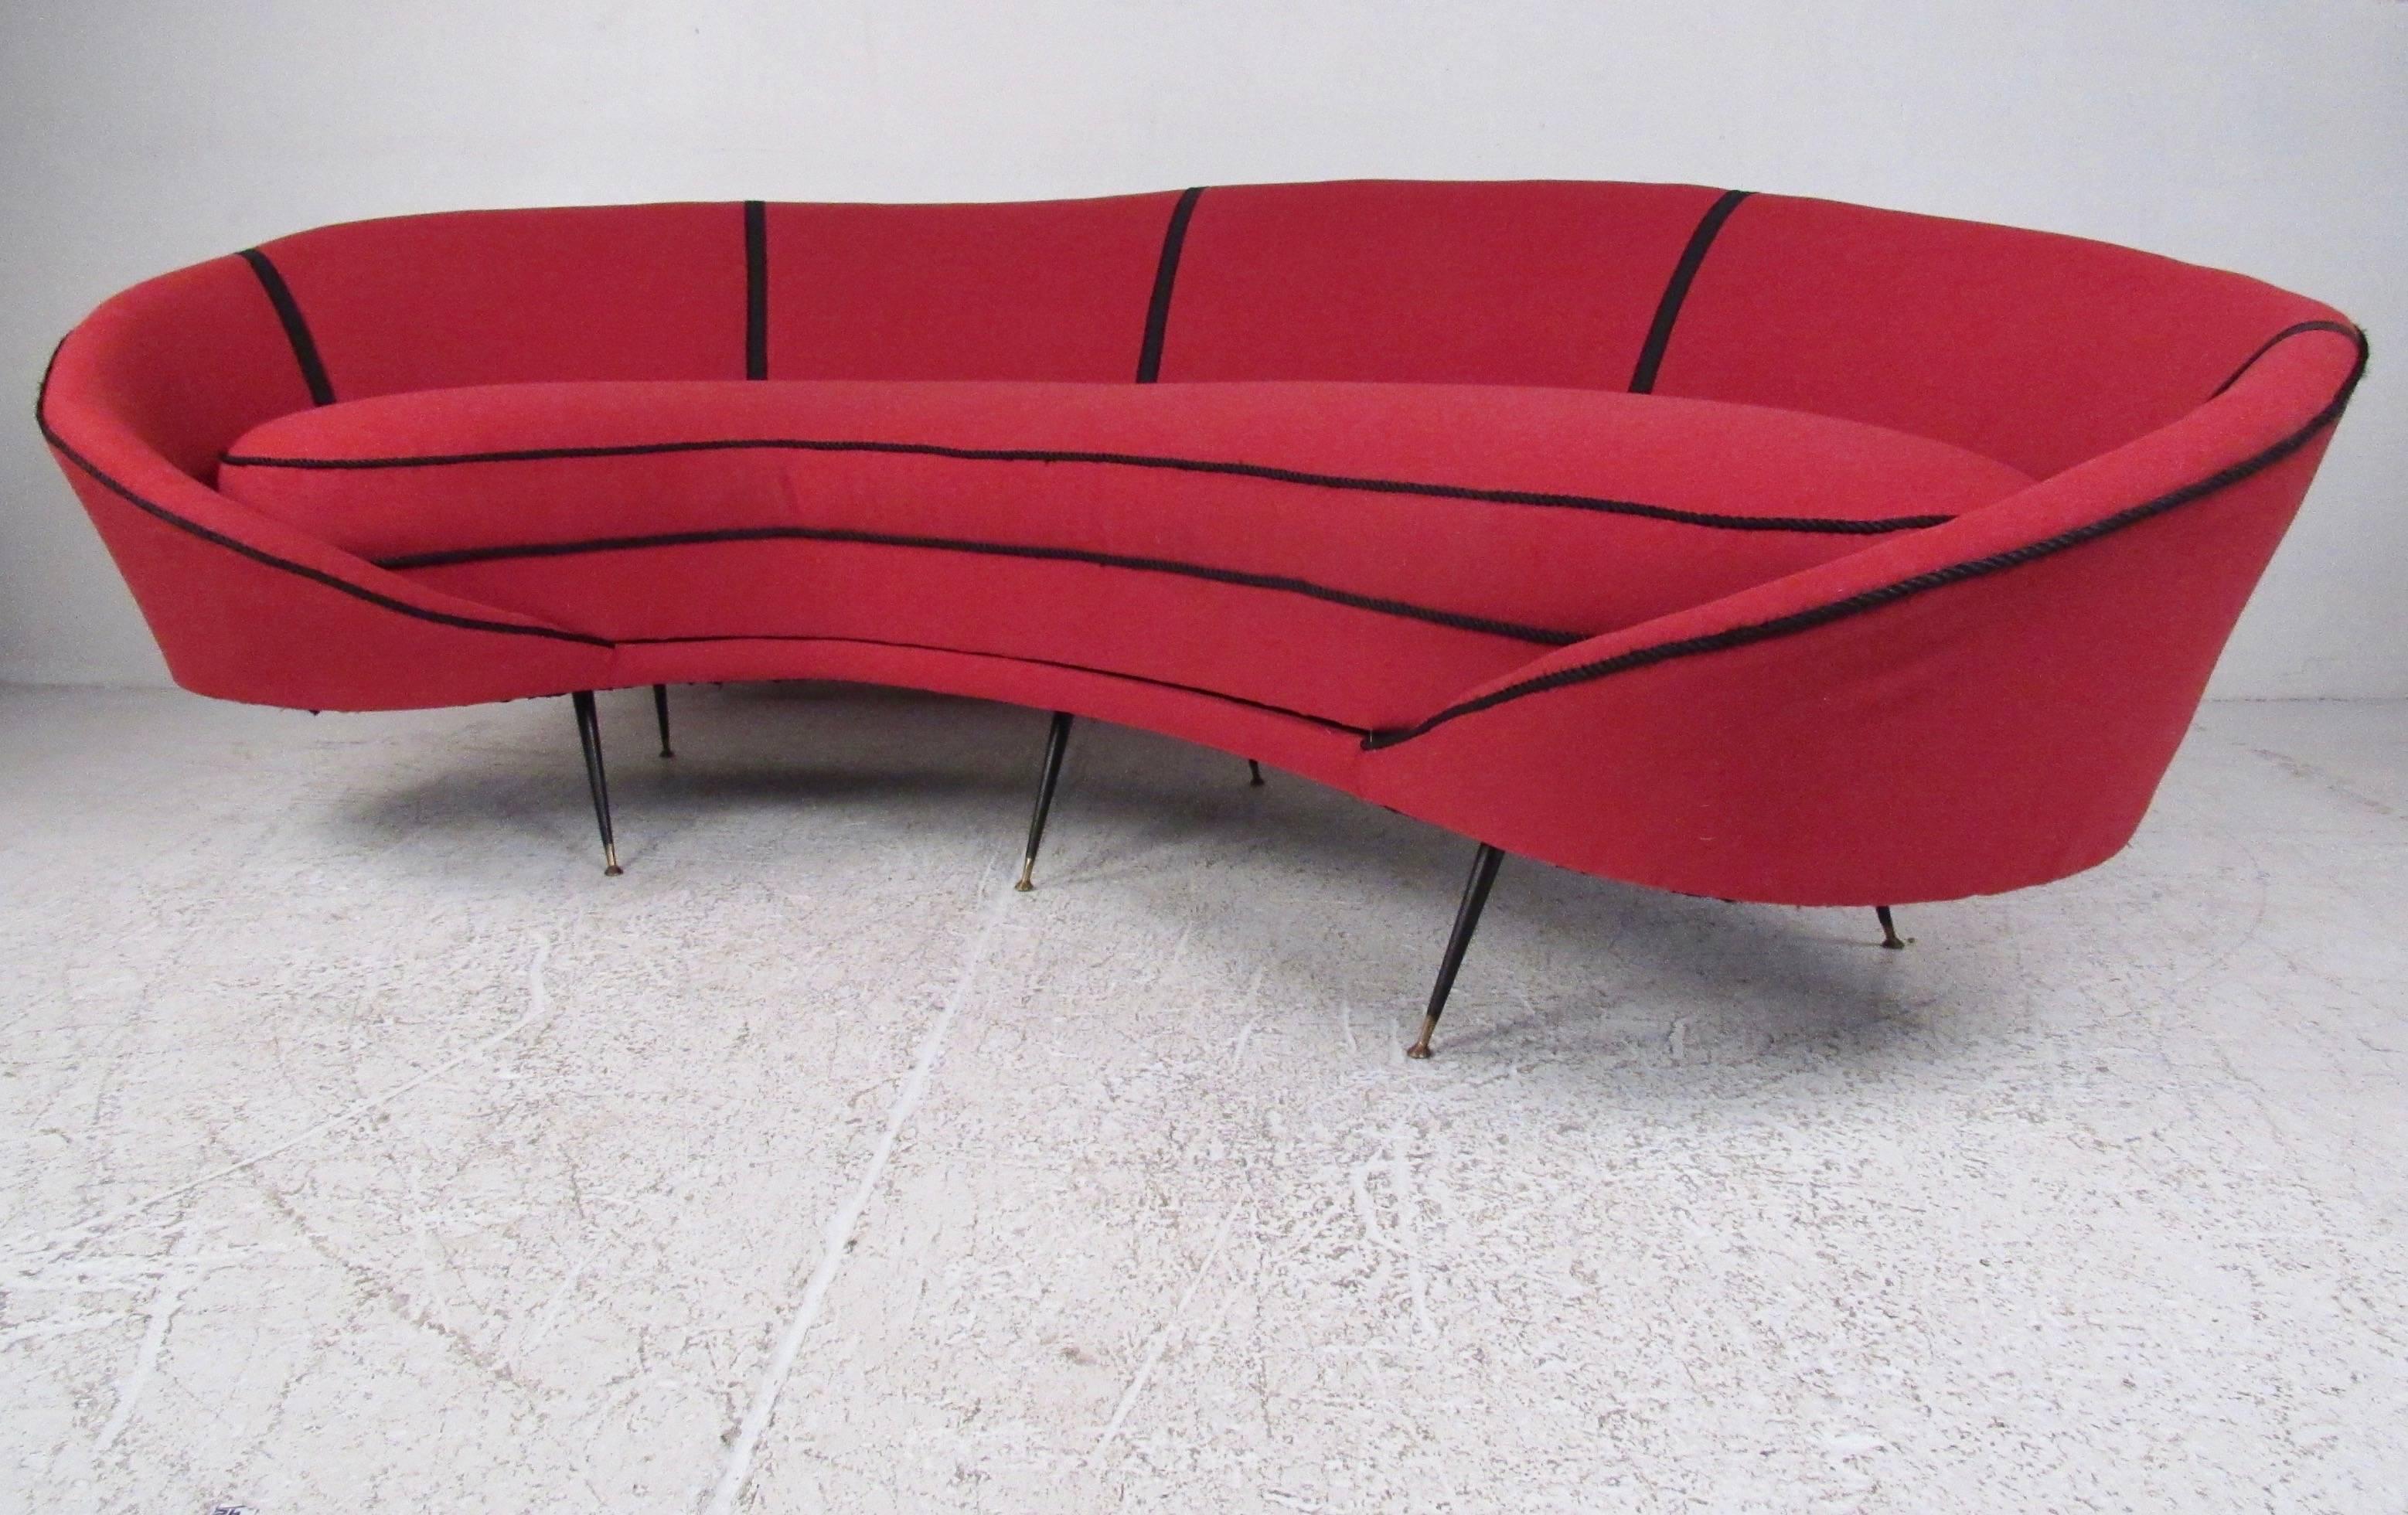 This stunning Italian modern sofa features vibrant red upholstery, braided trim, and tapered legs. After the Mid-Century Modern style of Ico Parisi this large sofa makes an impressive statement in home, hotel, or business seating area. Please